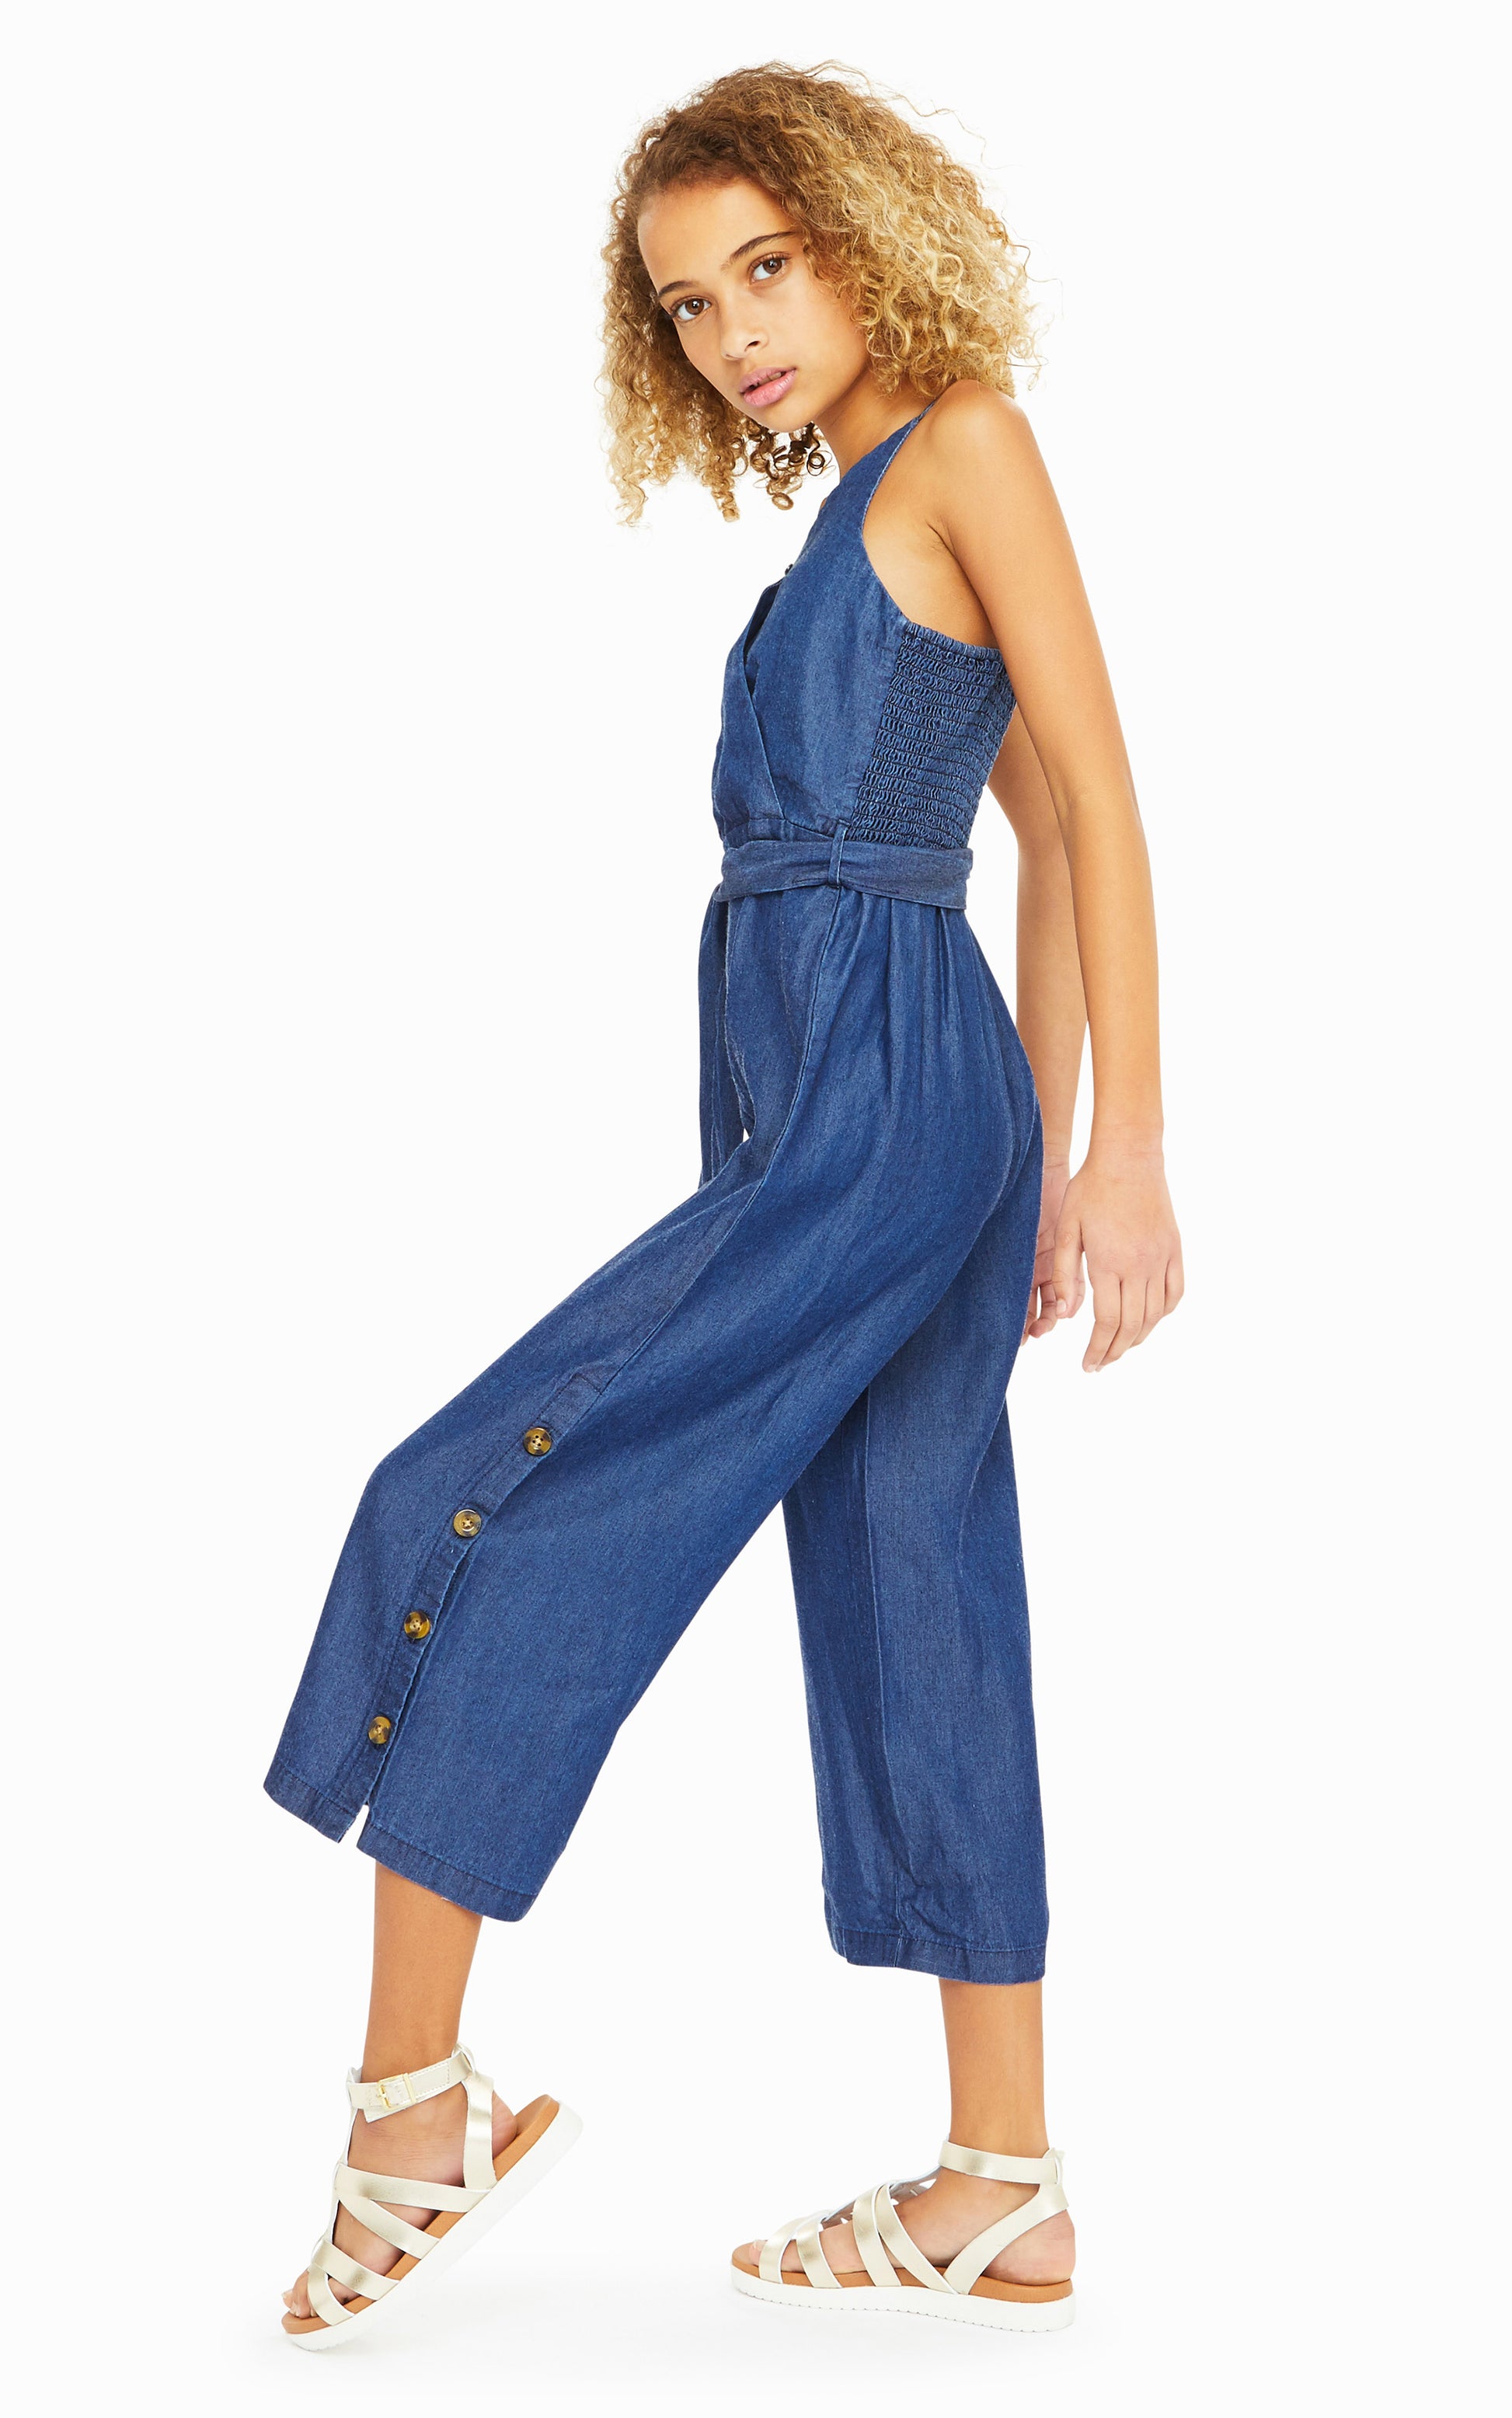 Side view of girl wearing denim-colored sleeveless jumpsuit with belted waist and leopard print button accents on legs.